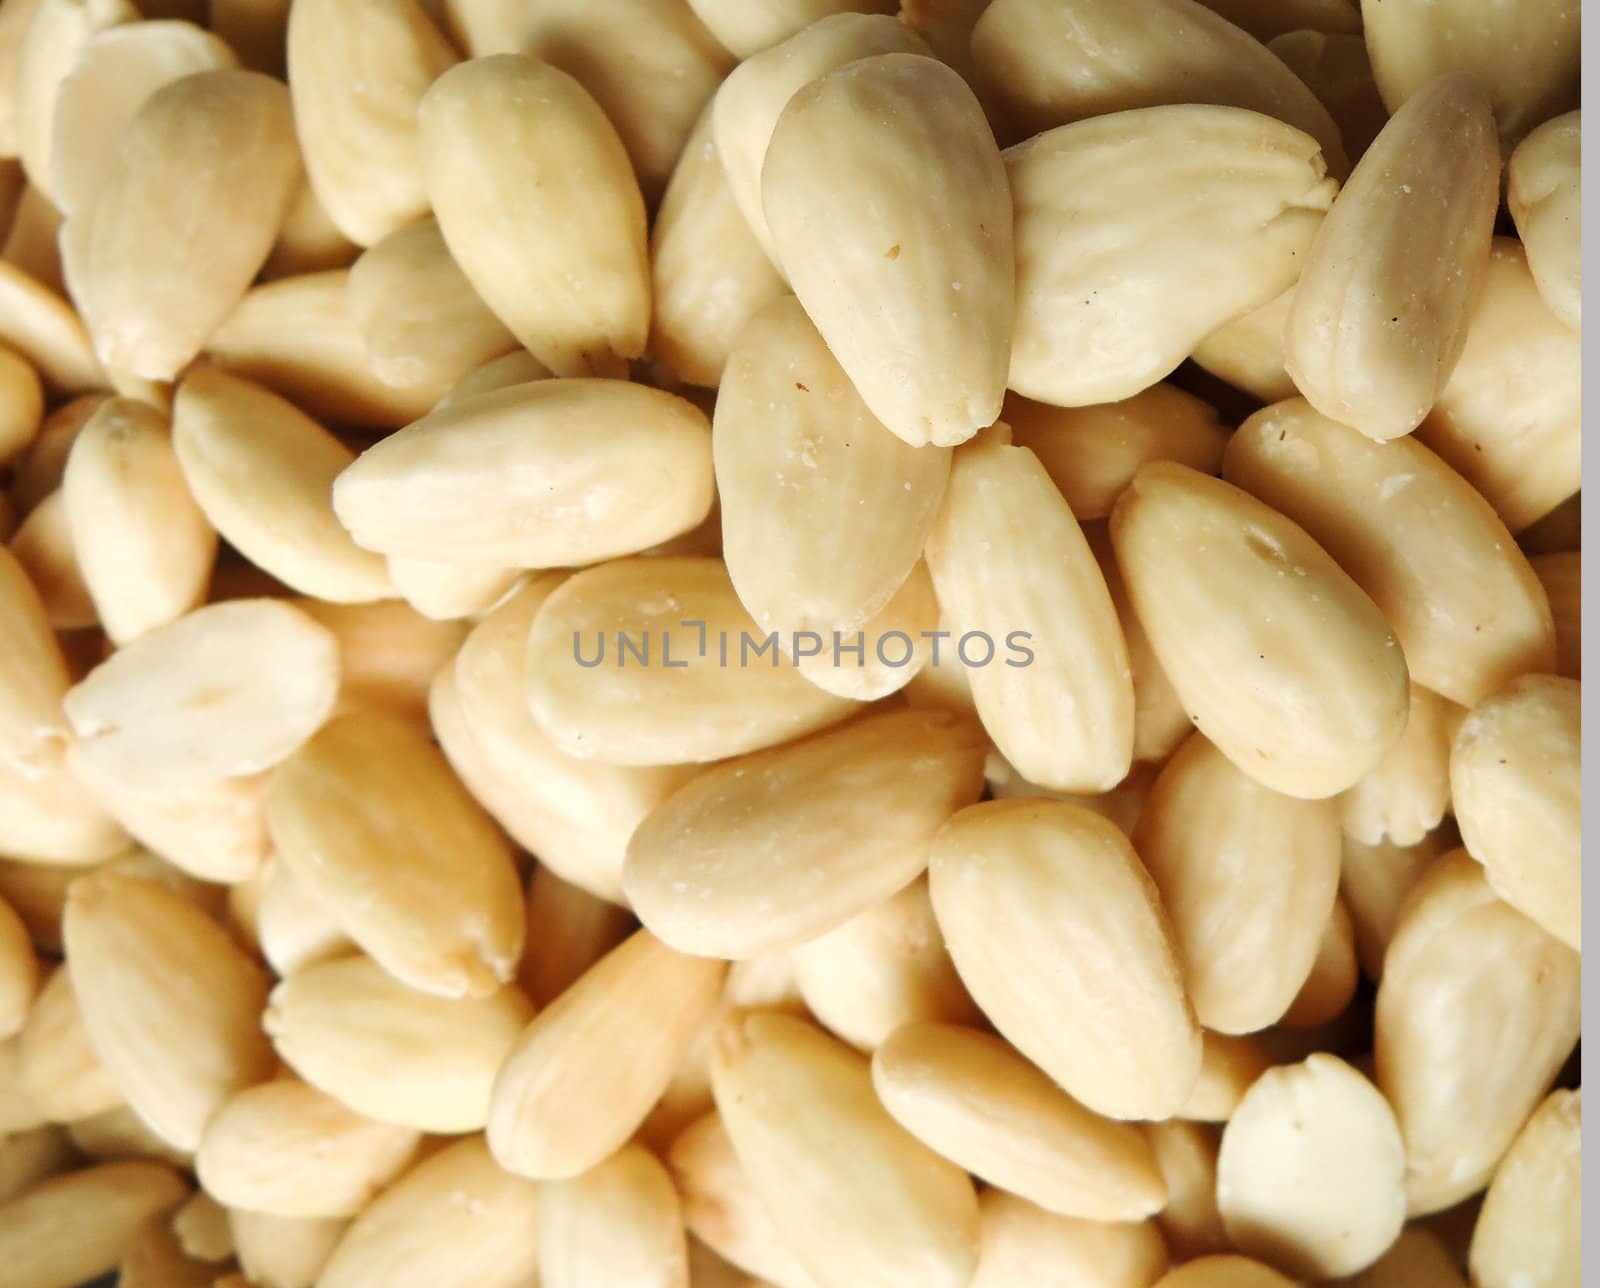 pine nuts background

